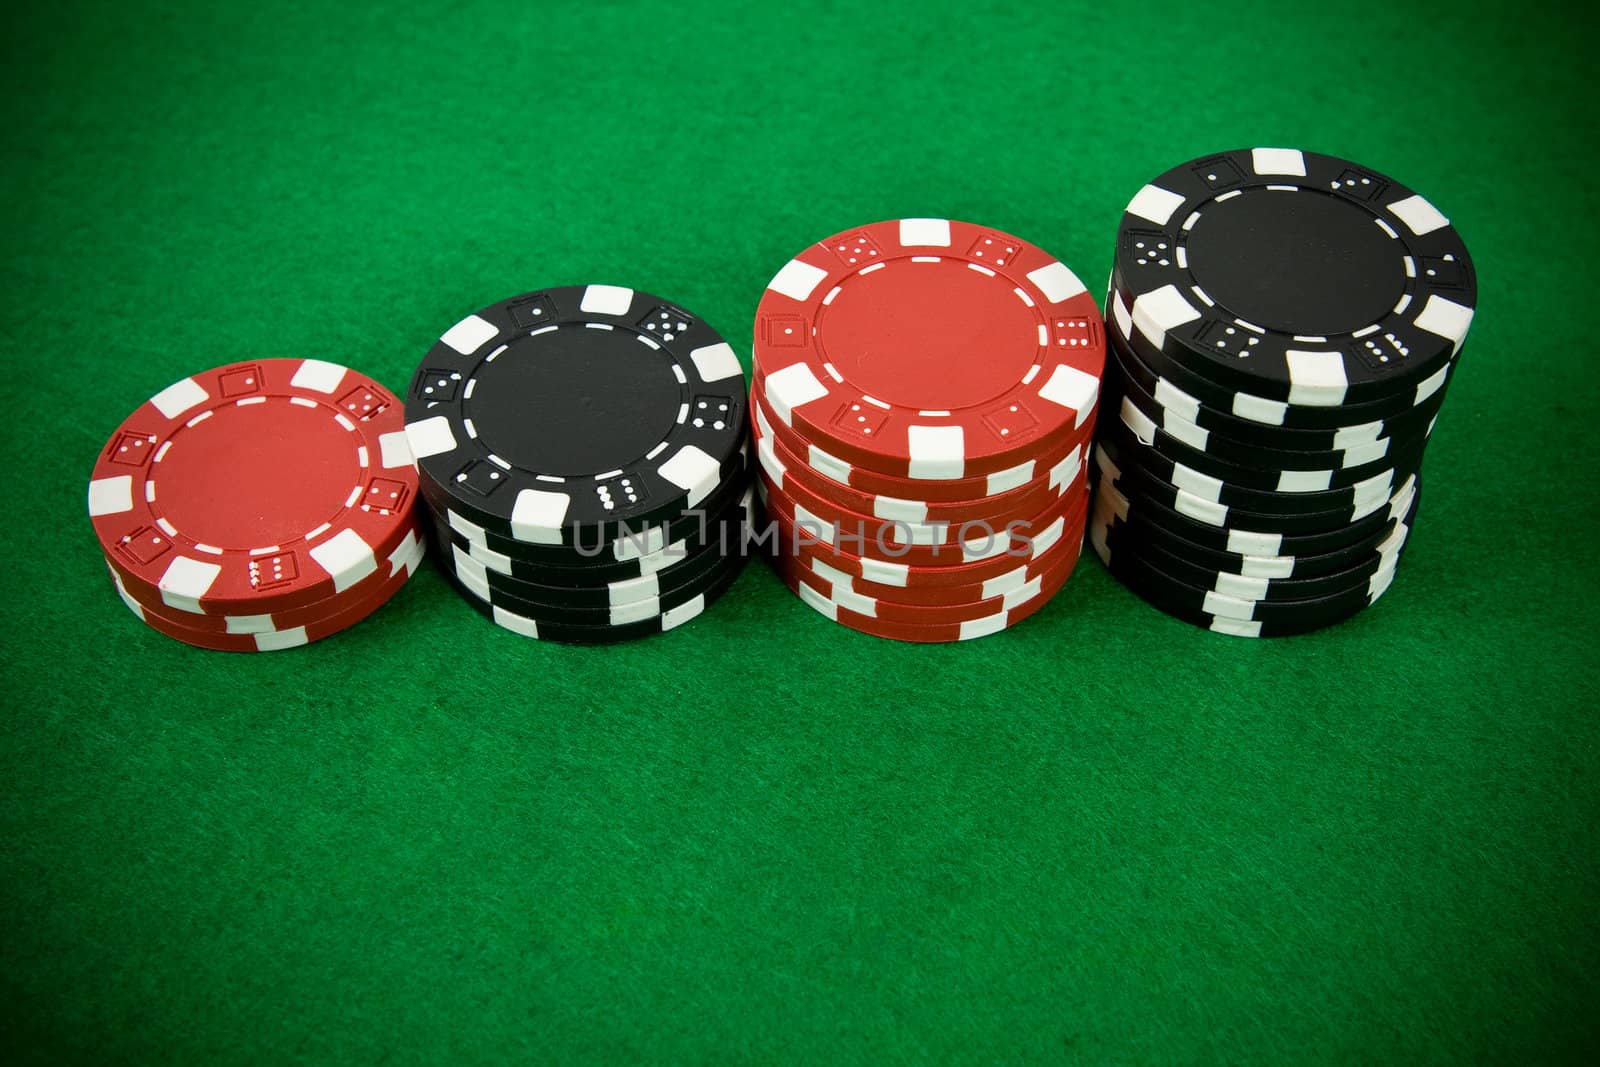 Stack of black and red poker chips on green table.